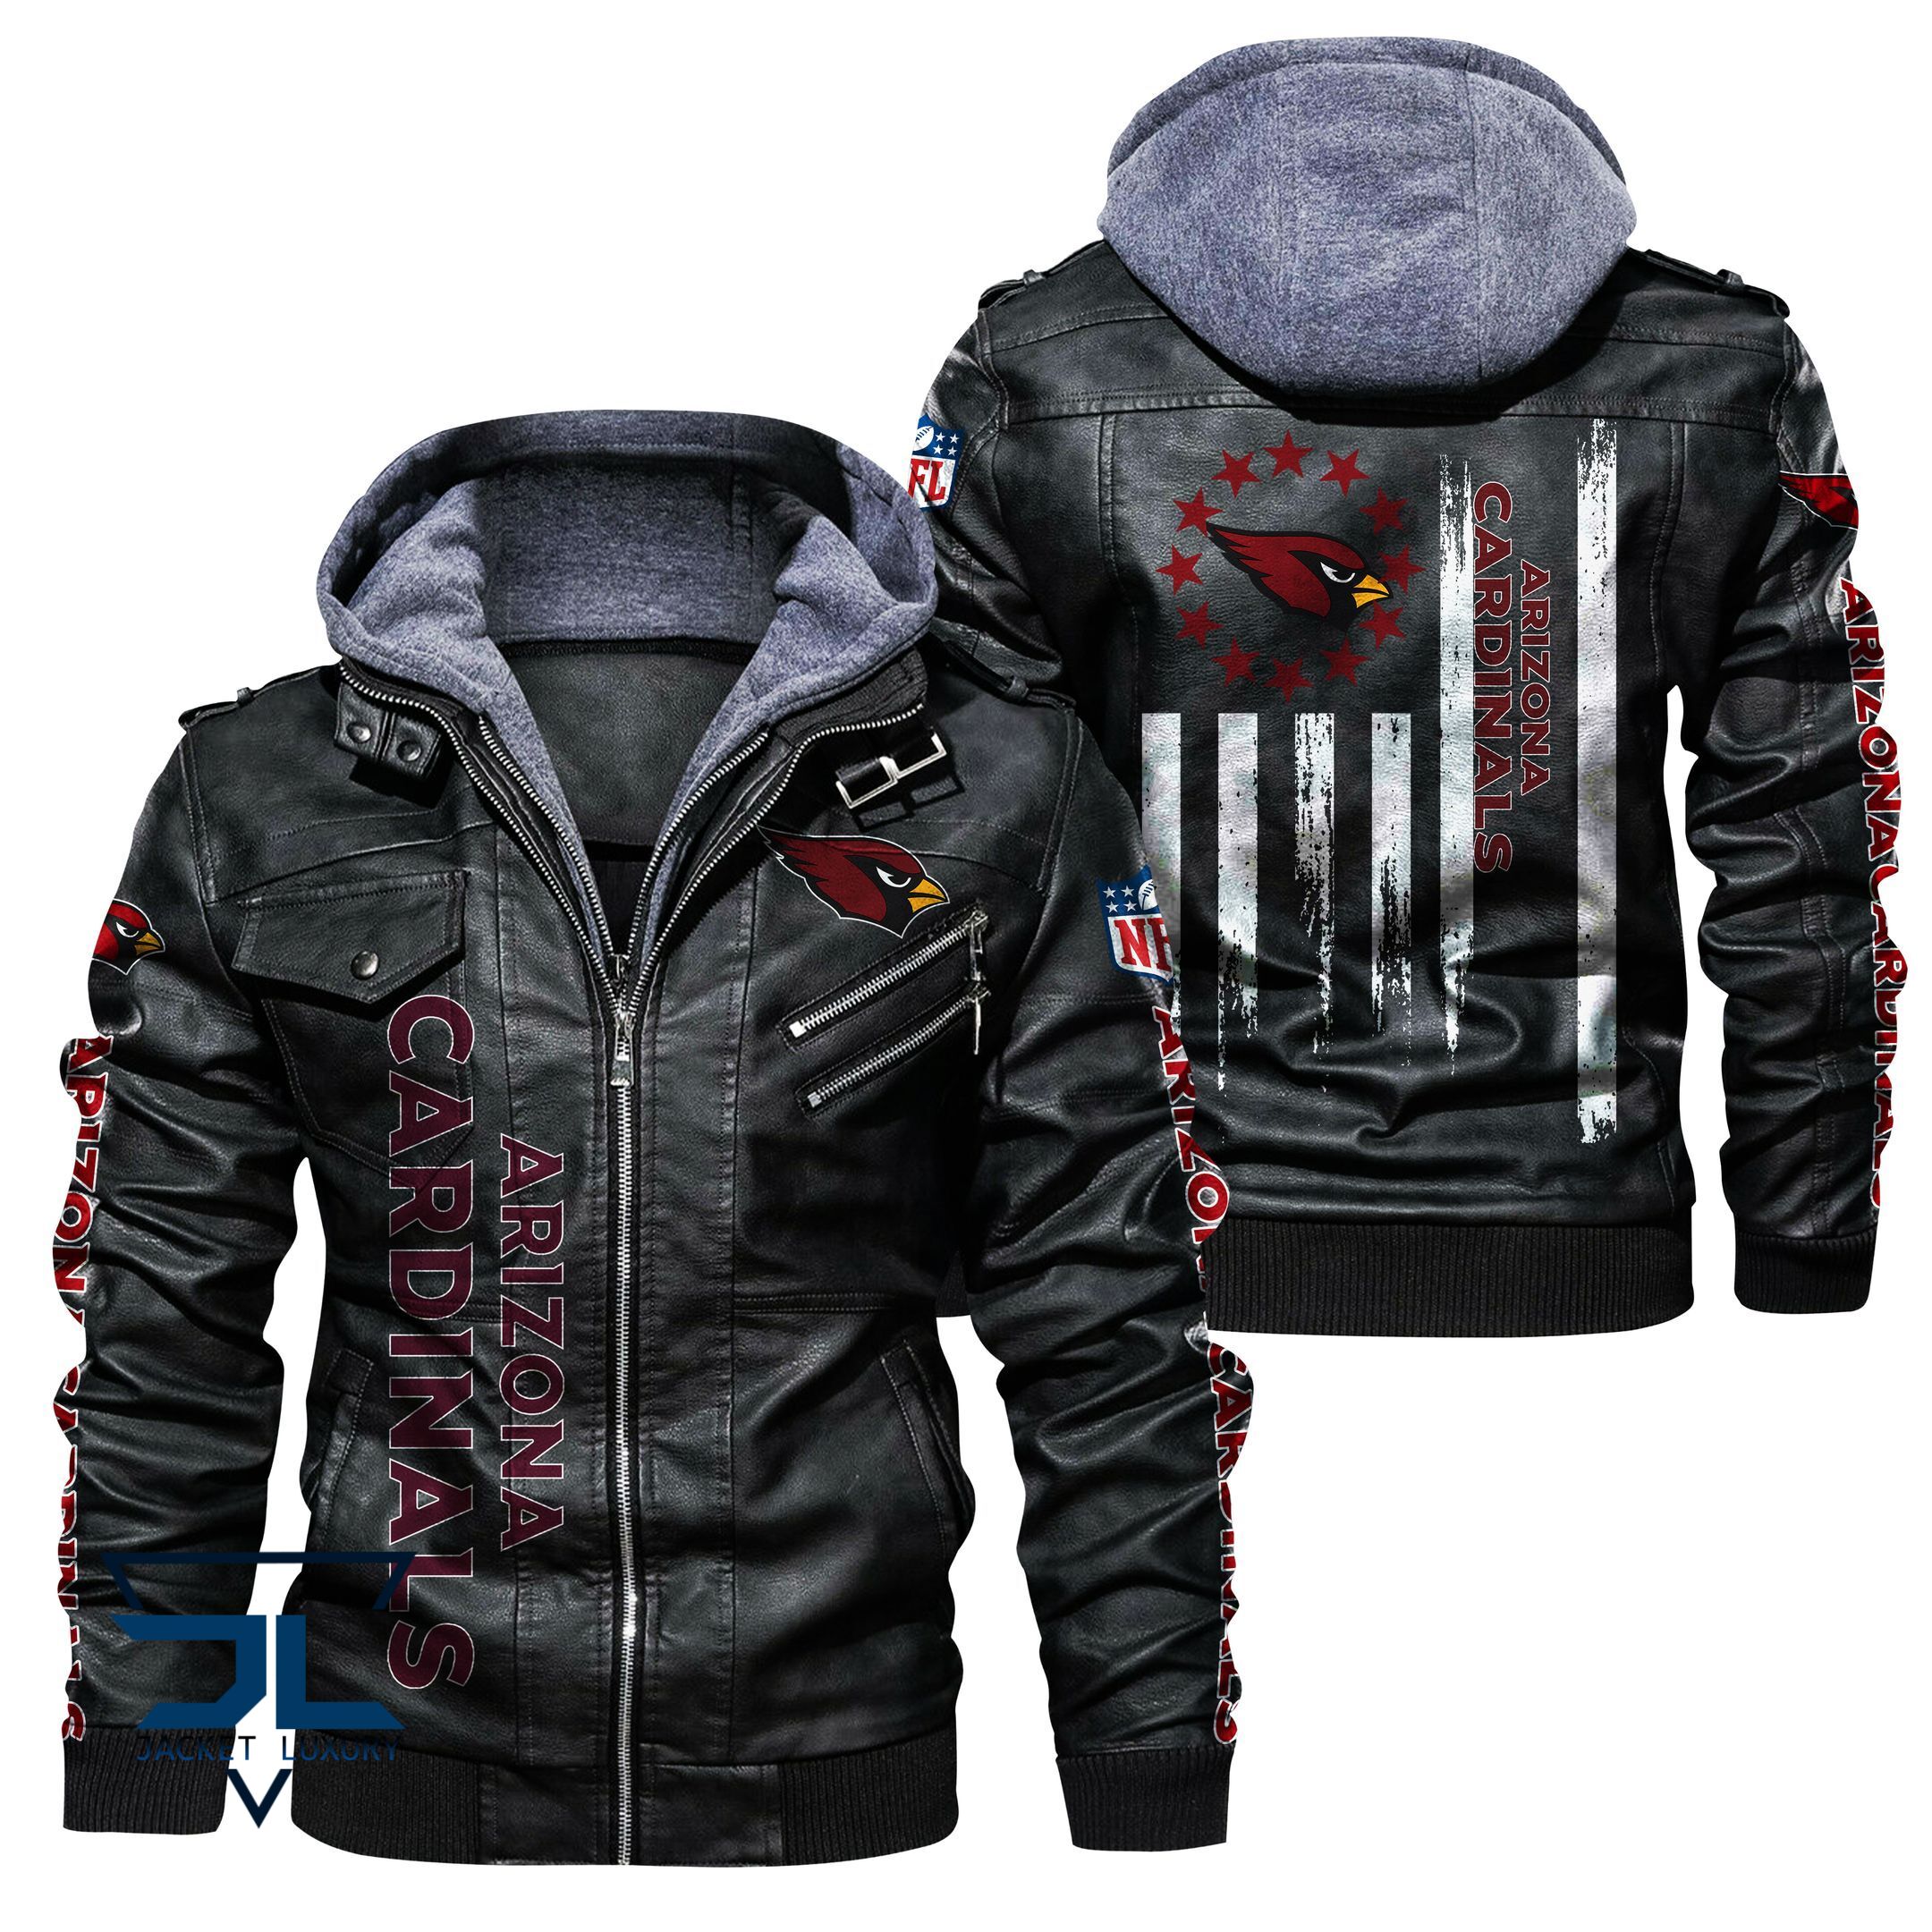 Do You Have A Favorite Jacket That You Wear All The Time? Word2